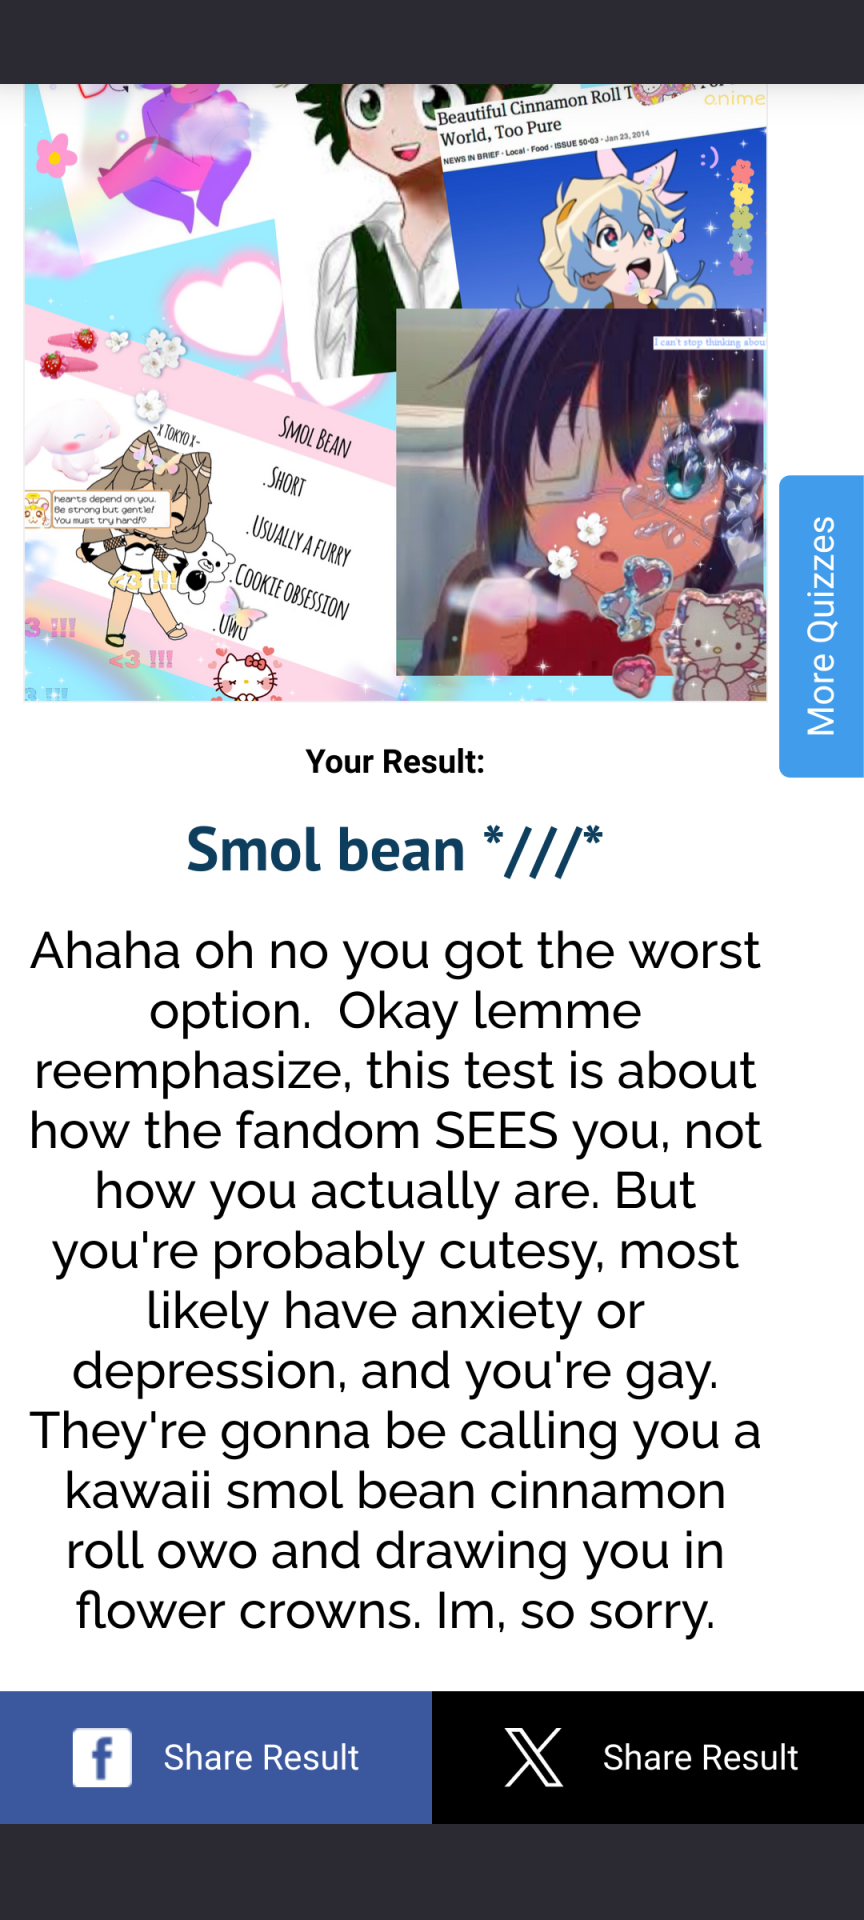 a uquiz result that reads: "Your Result: Smol bean *///* Ahaha oh no you got the worst option. Okay lemme reemphasize, this test is about how the fandom SEES you, not how you actually are. But you're probably cutesy, most likely have anxiety or depression, and you're gay. They're gonna be calling you a kawaii smol bean cinnamon roll owo and drawing you in flower crowns. Im, so sorry." There is a collage image of several cute-type characters with sparkles and blushes edited on top of them.